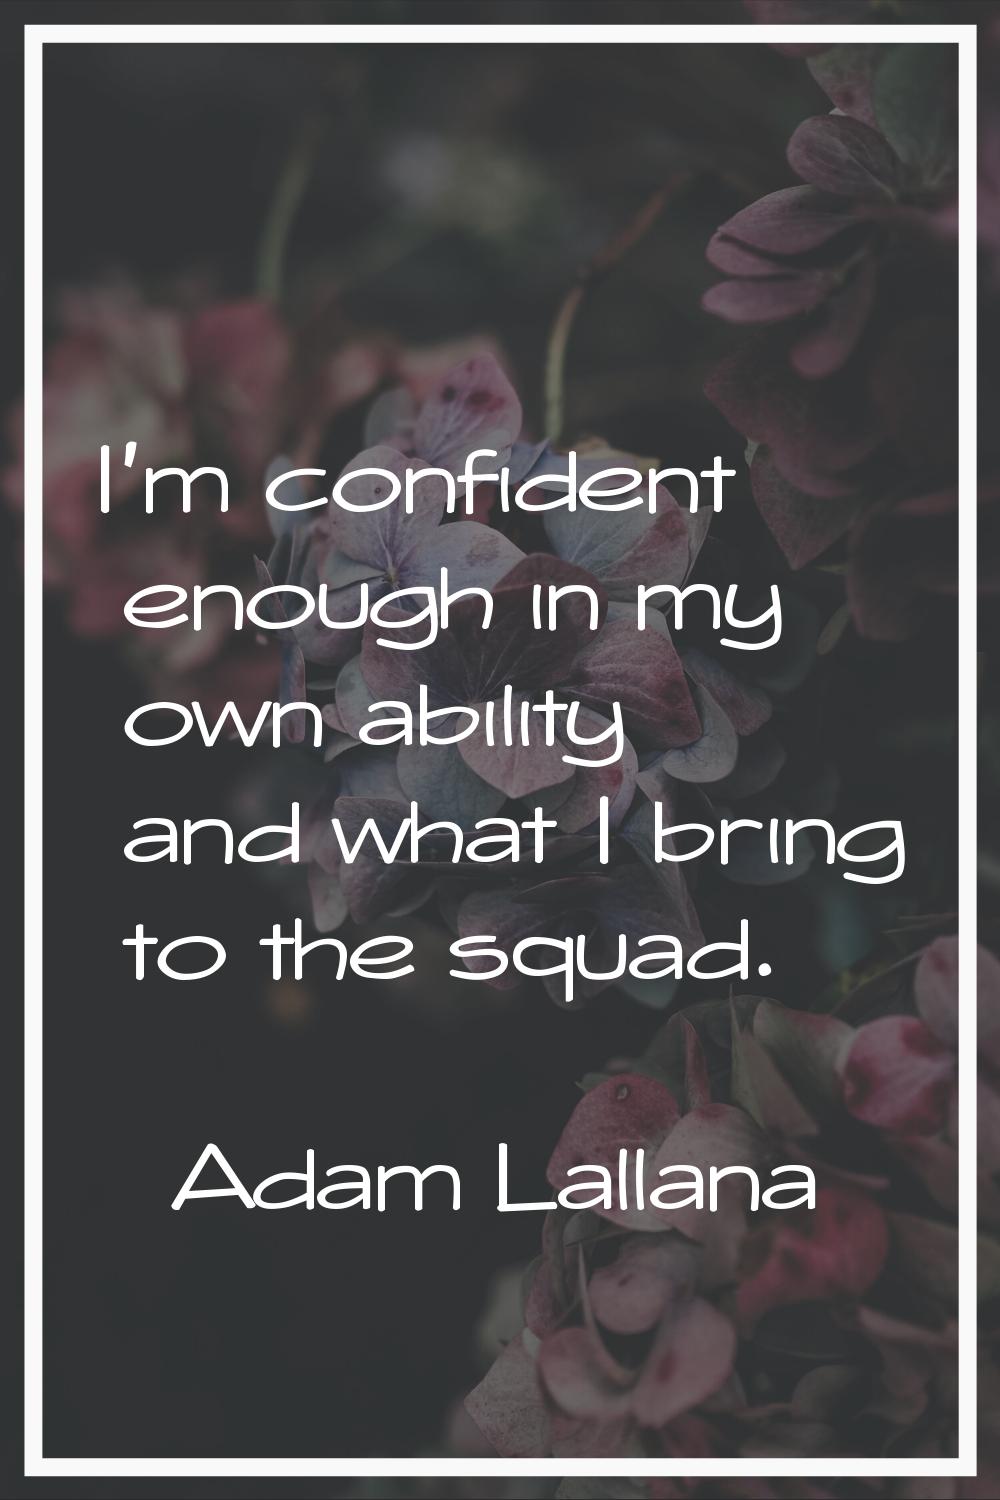 I'm confident enough in my own ability and what I bring to the squad.